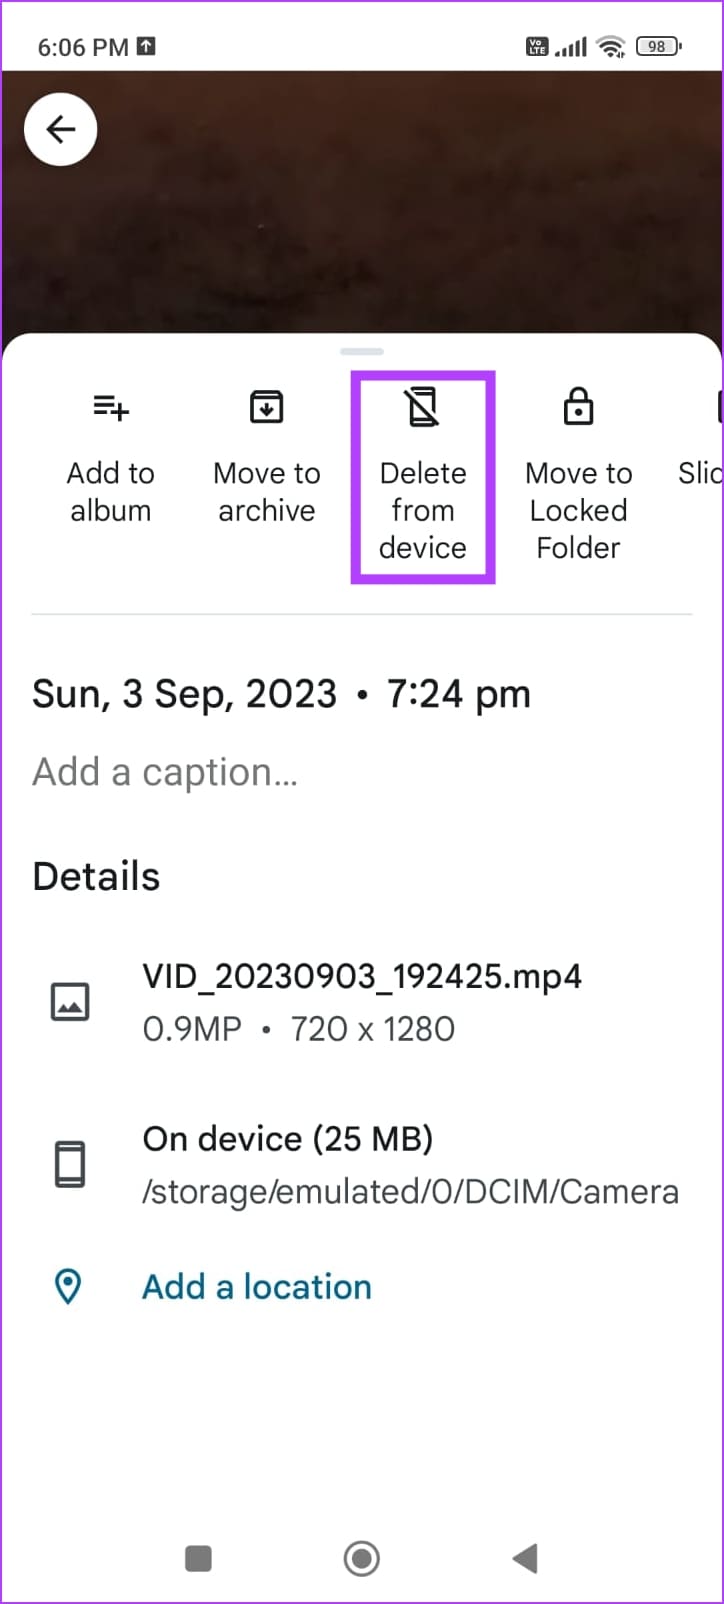 Delete from Device on Google Photos